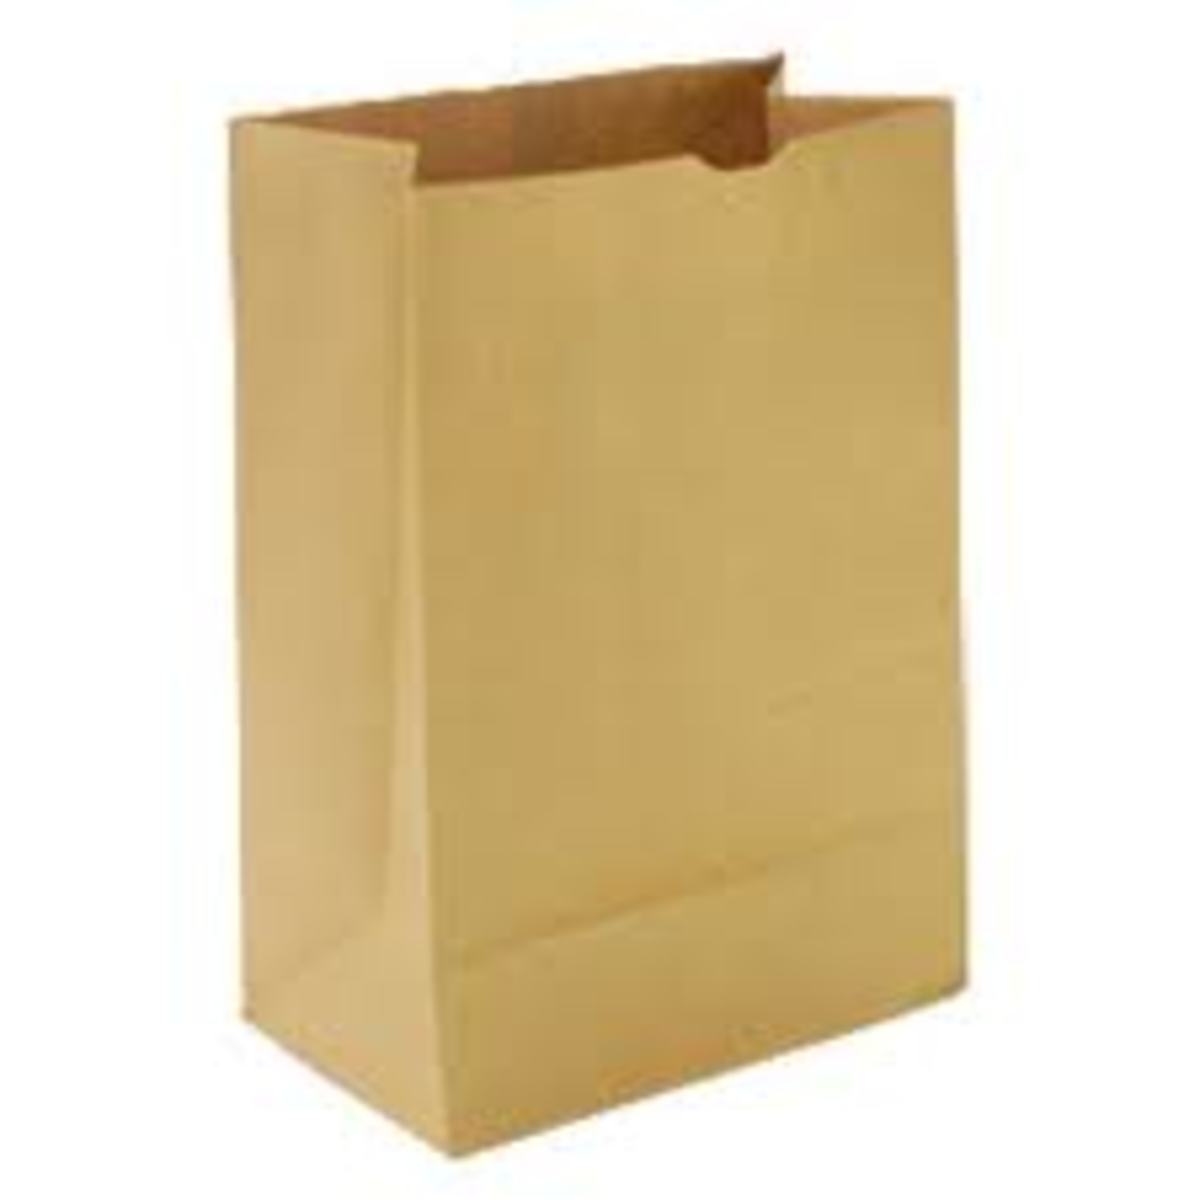 Click the Brown Paper Bag for more info. . .